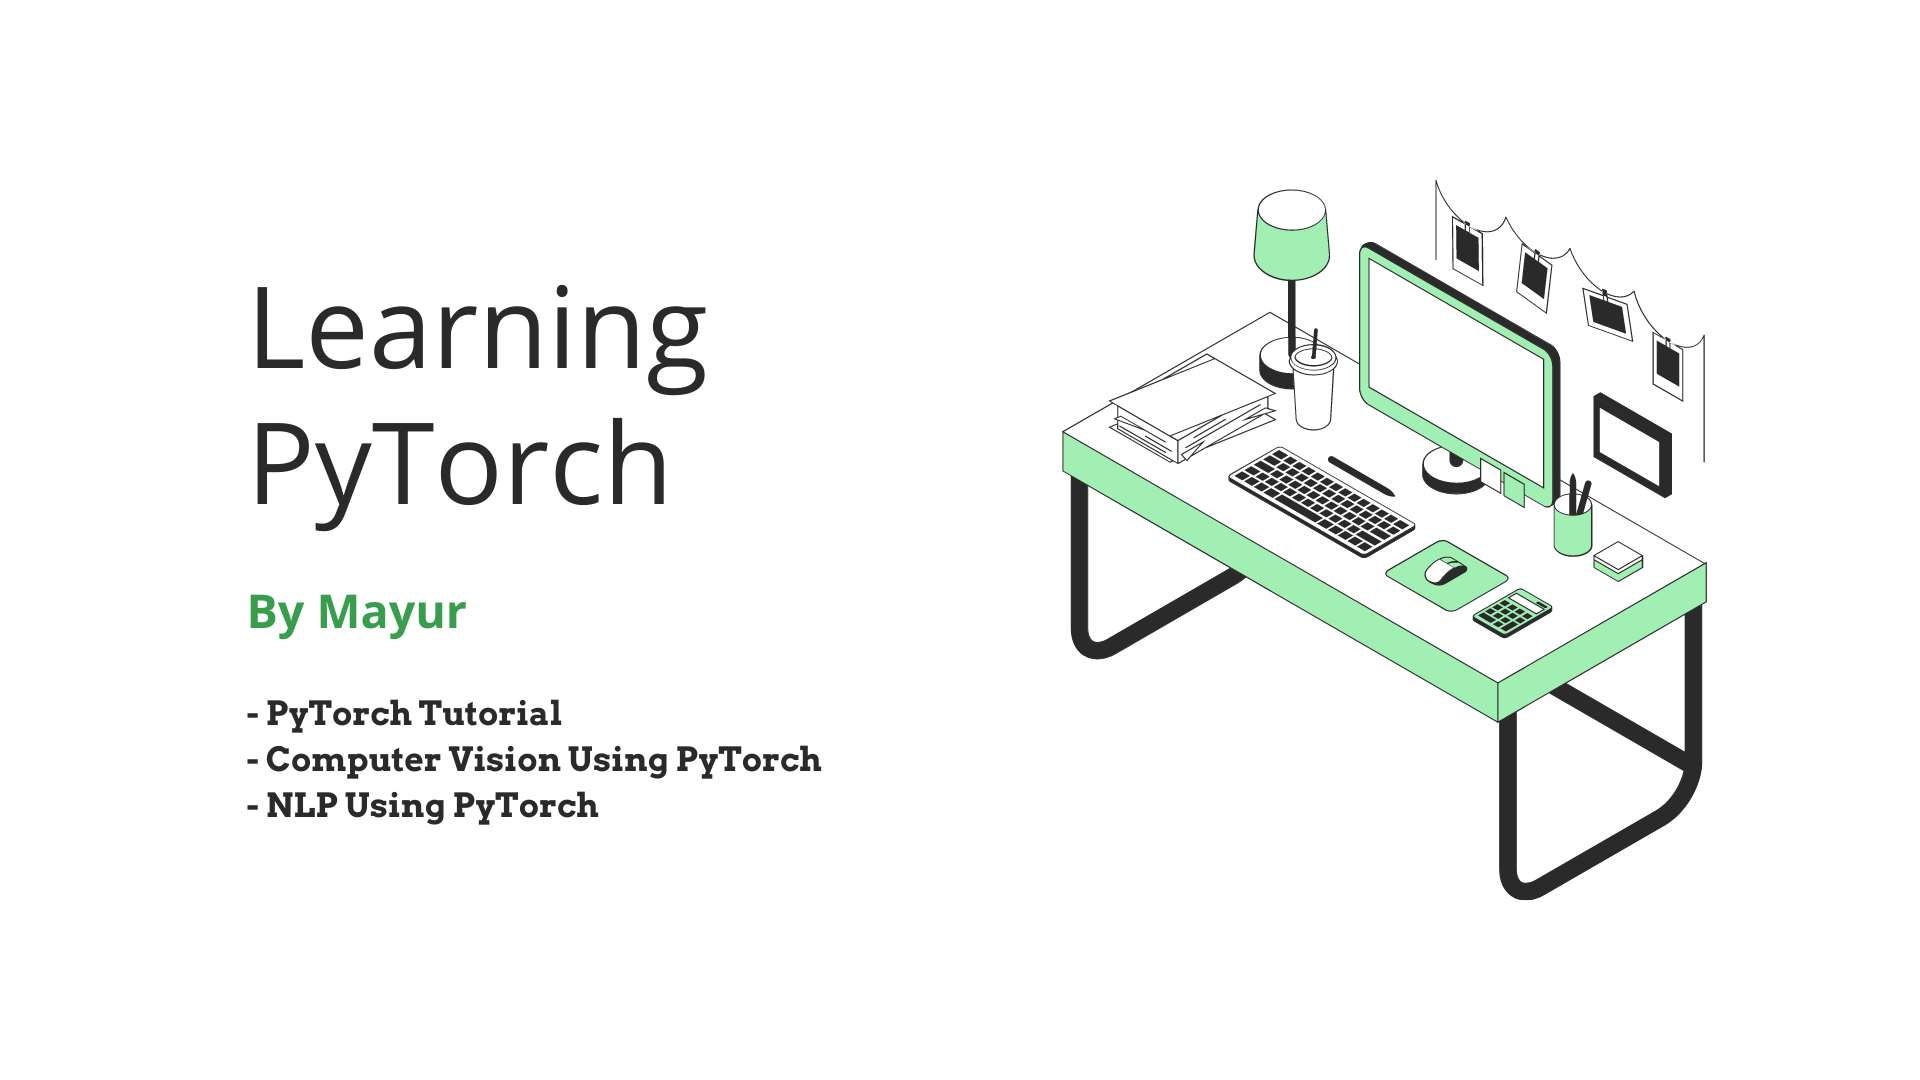 Learning PyTorch